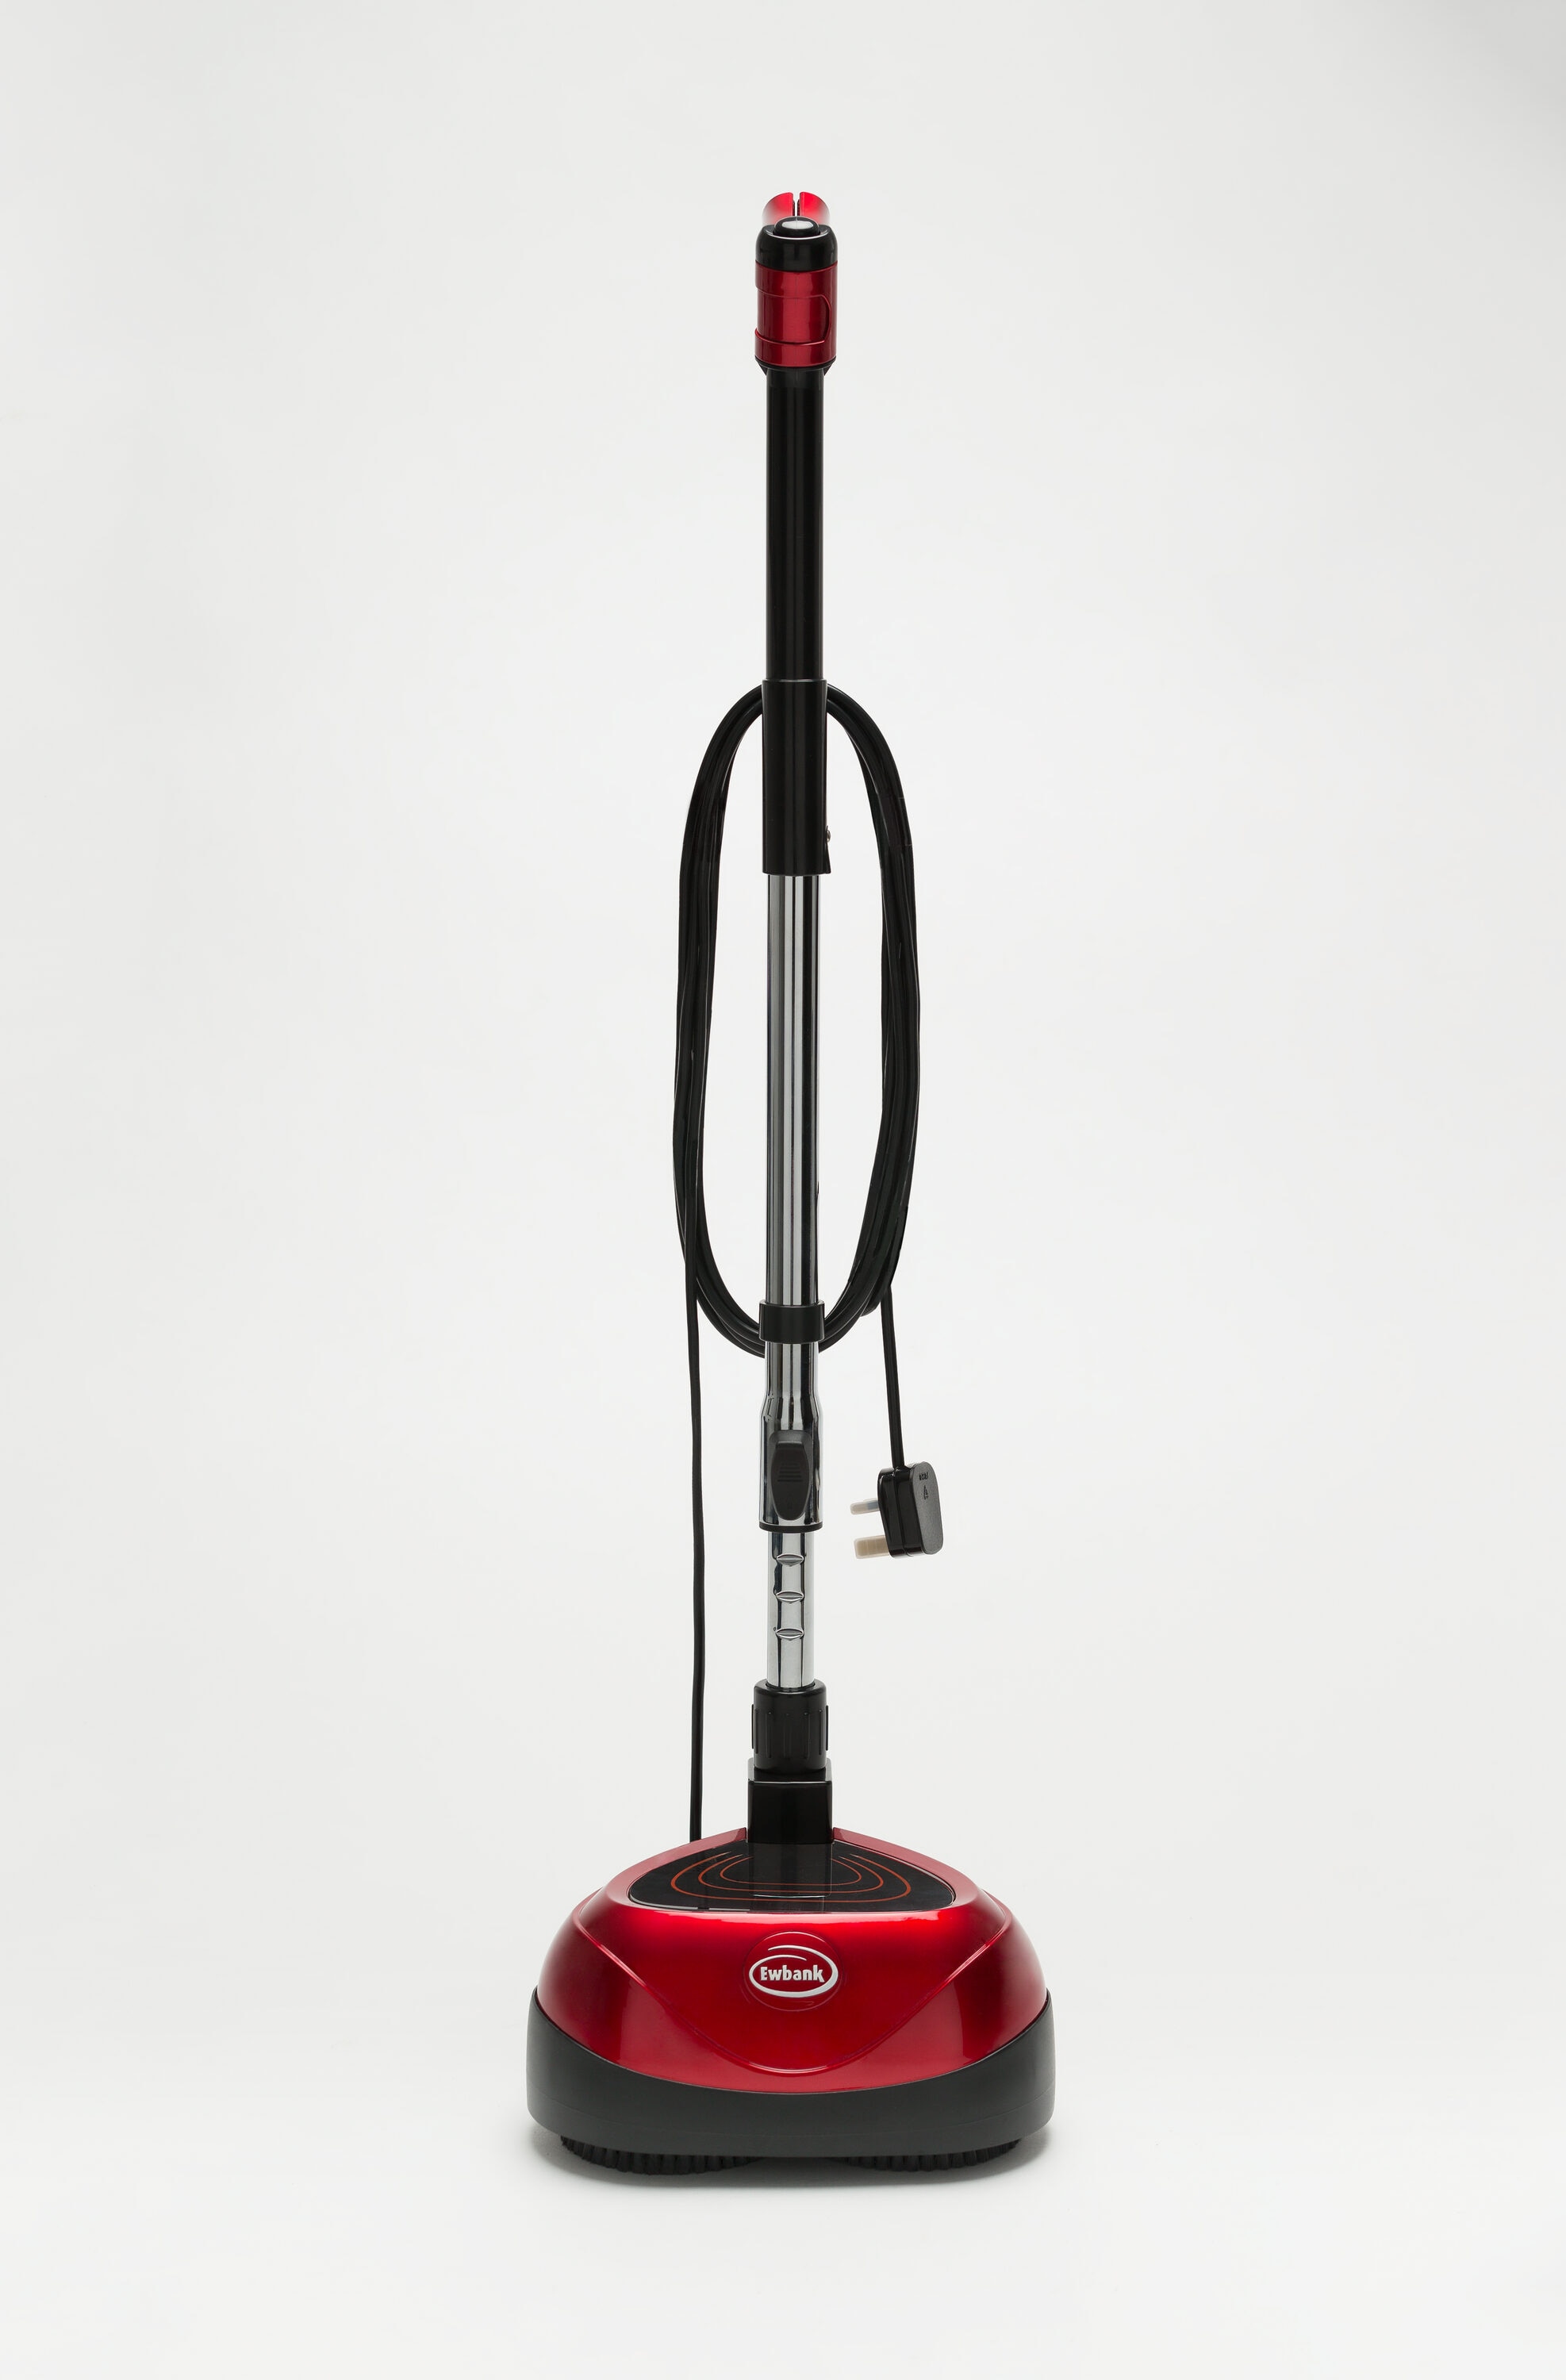 ProLux Core 13 Heavy Duty Commercial Polisher Floor Buffer Machine Scrubber and 5 Pads